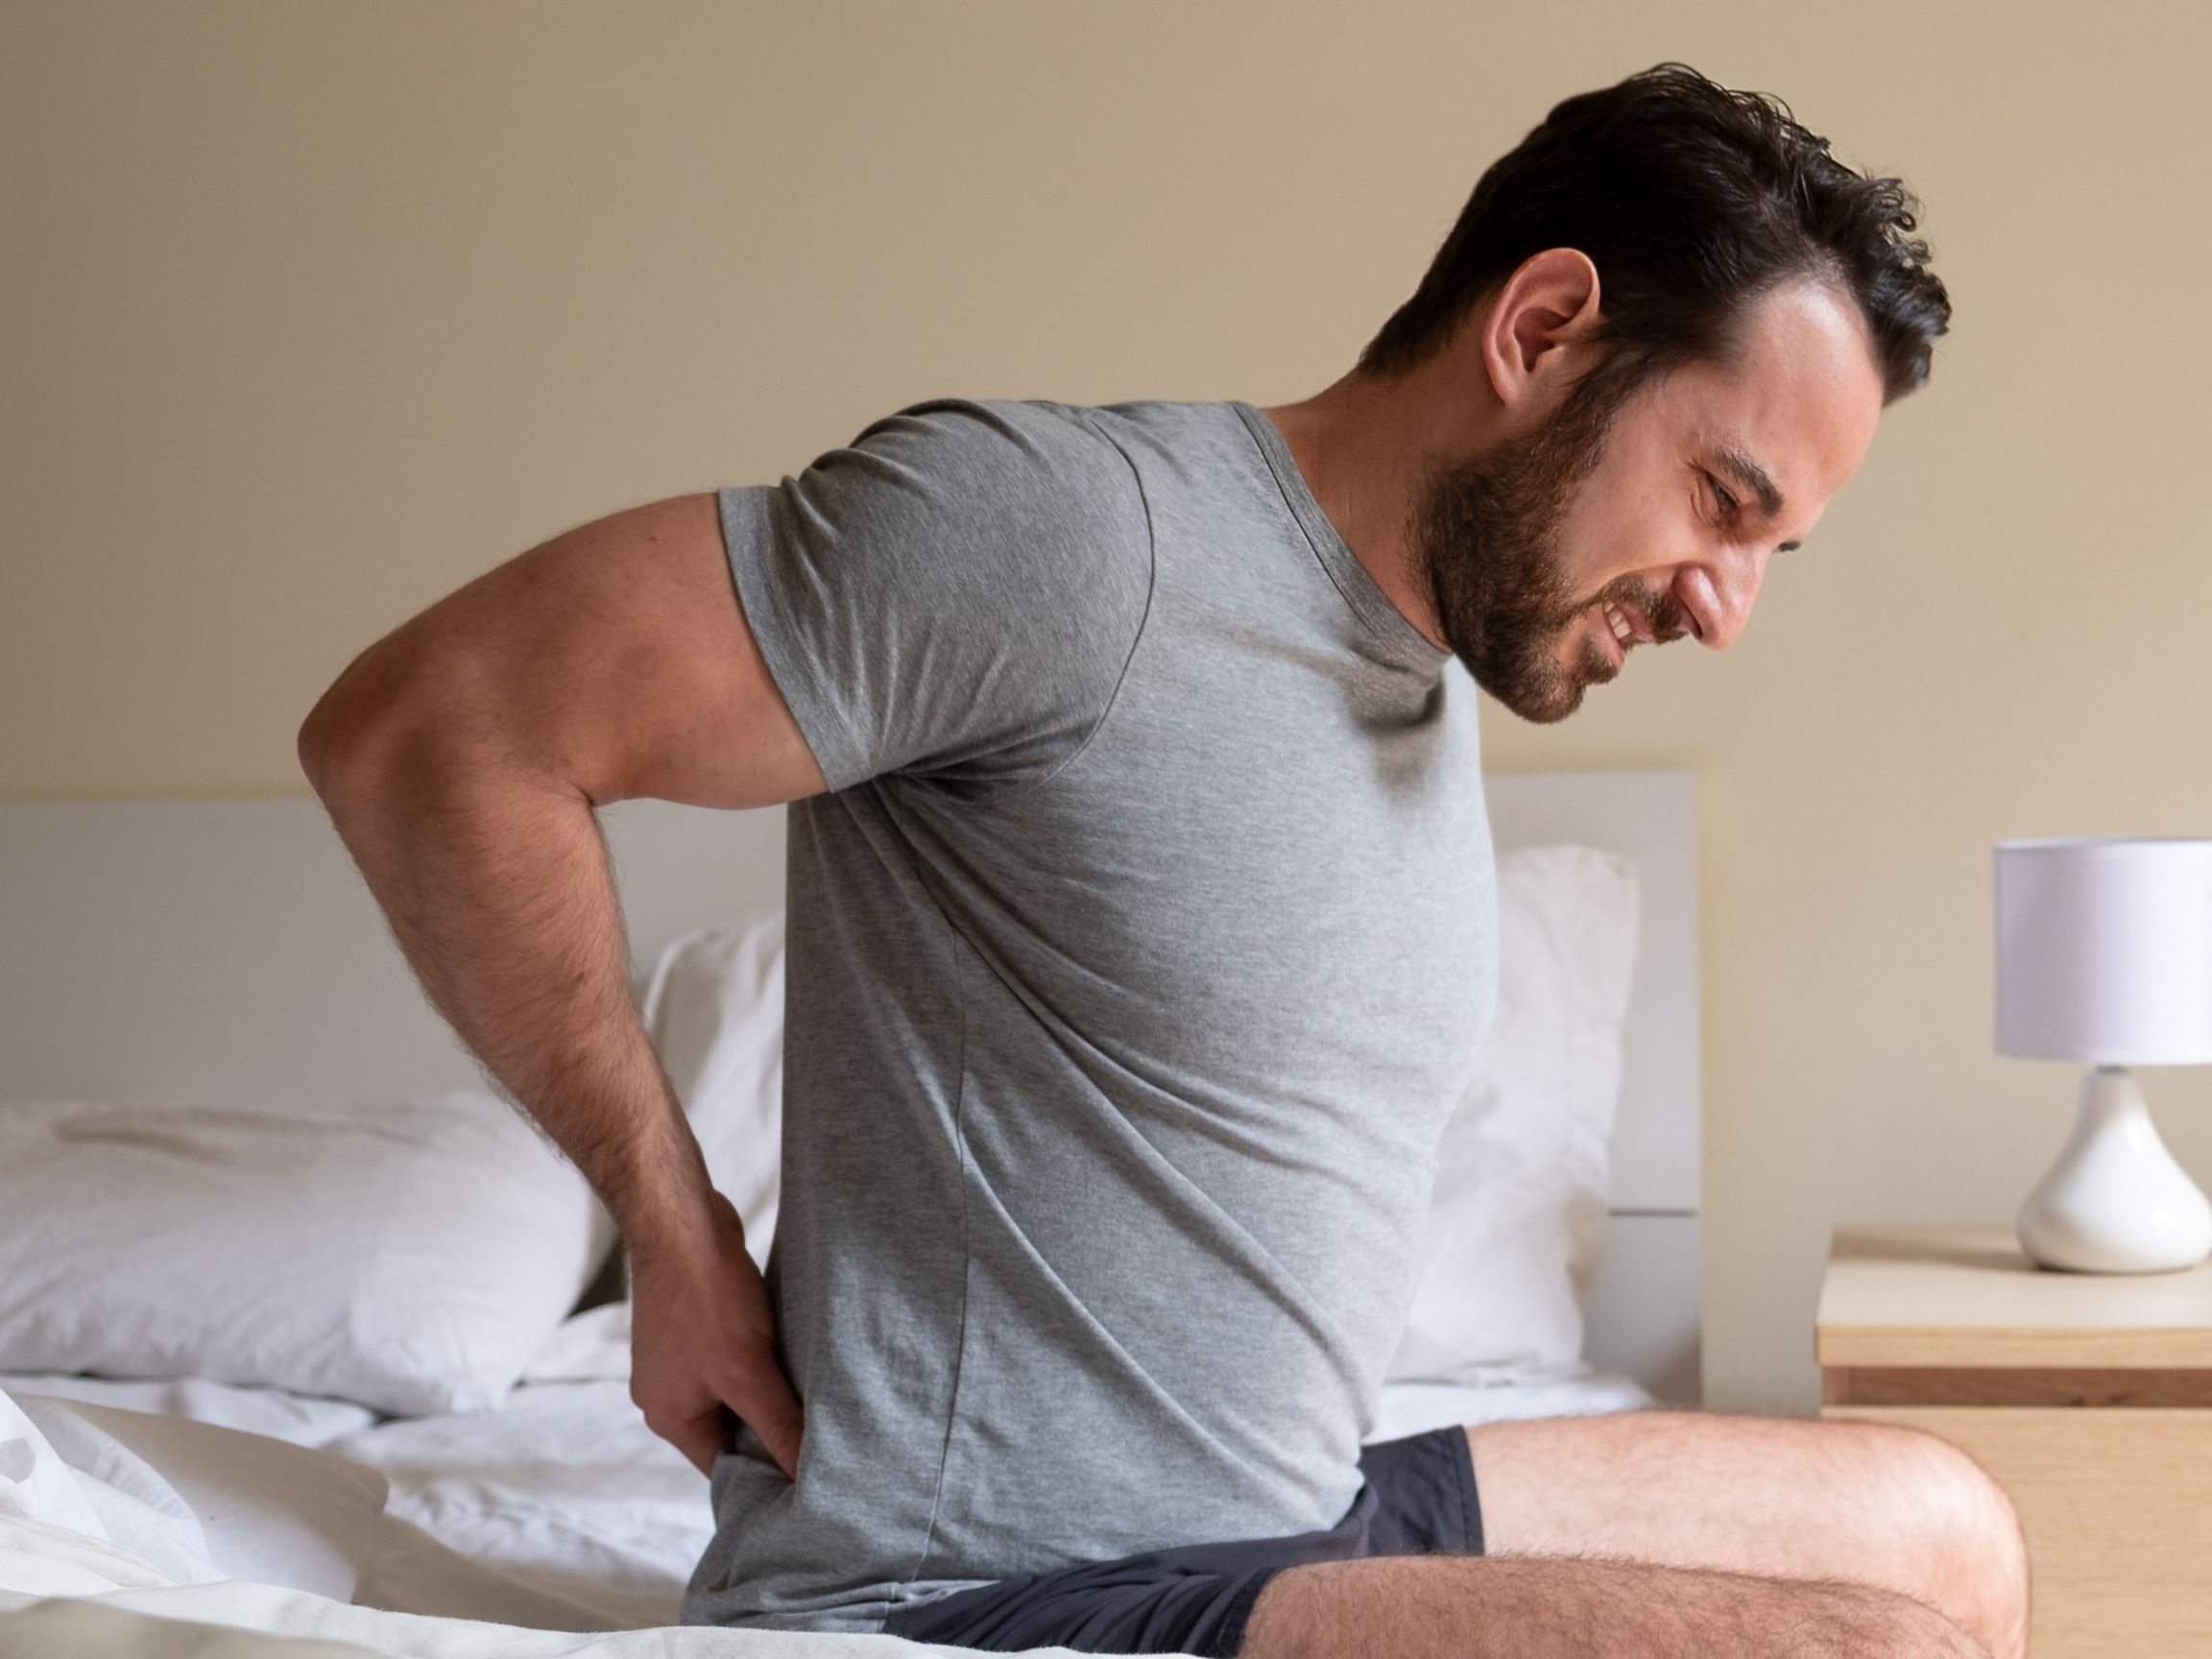 Know the signs that mean back pain needs a doctor's appointment.